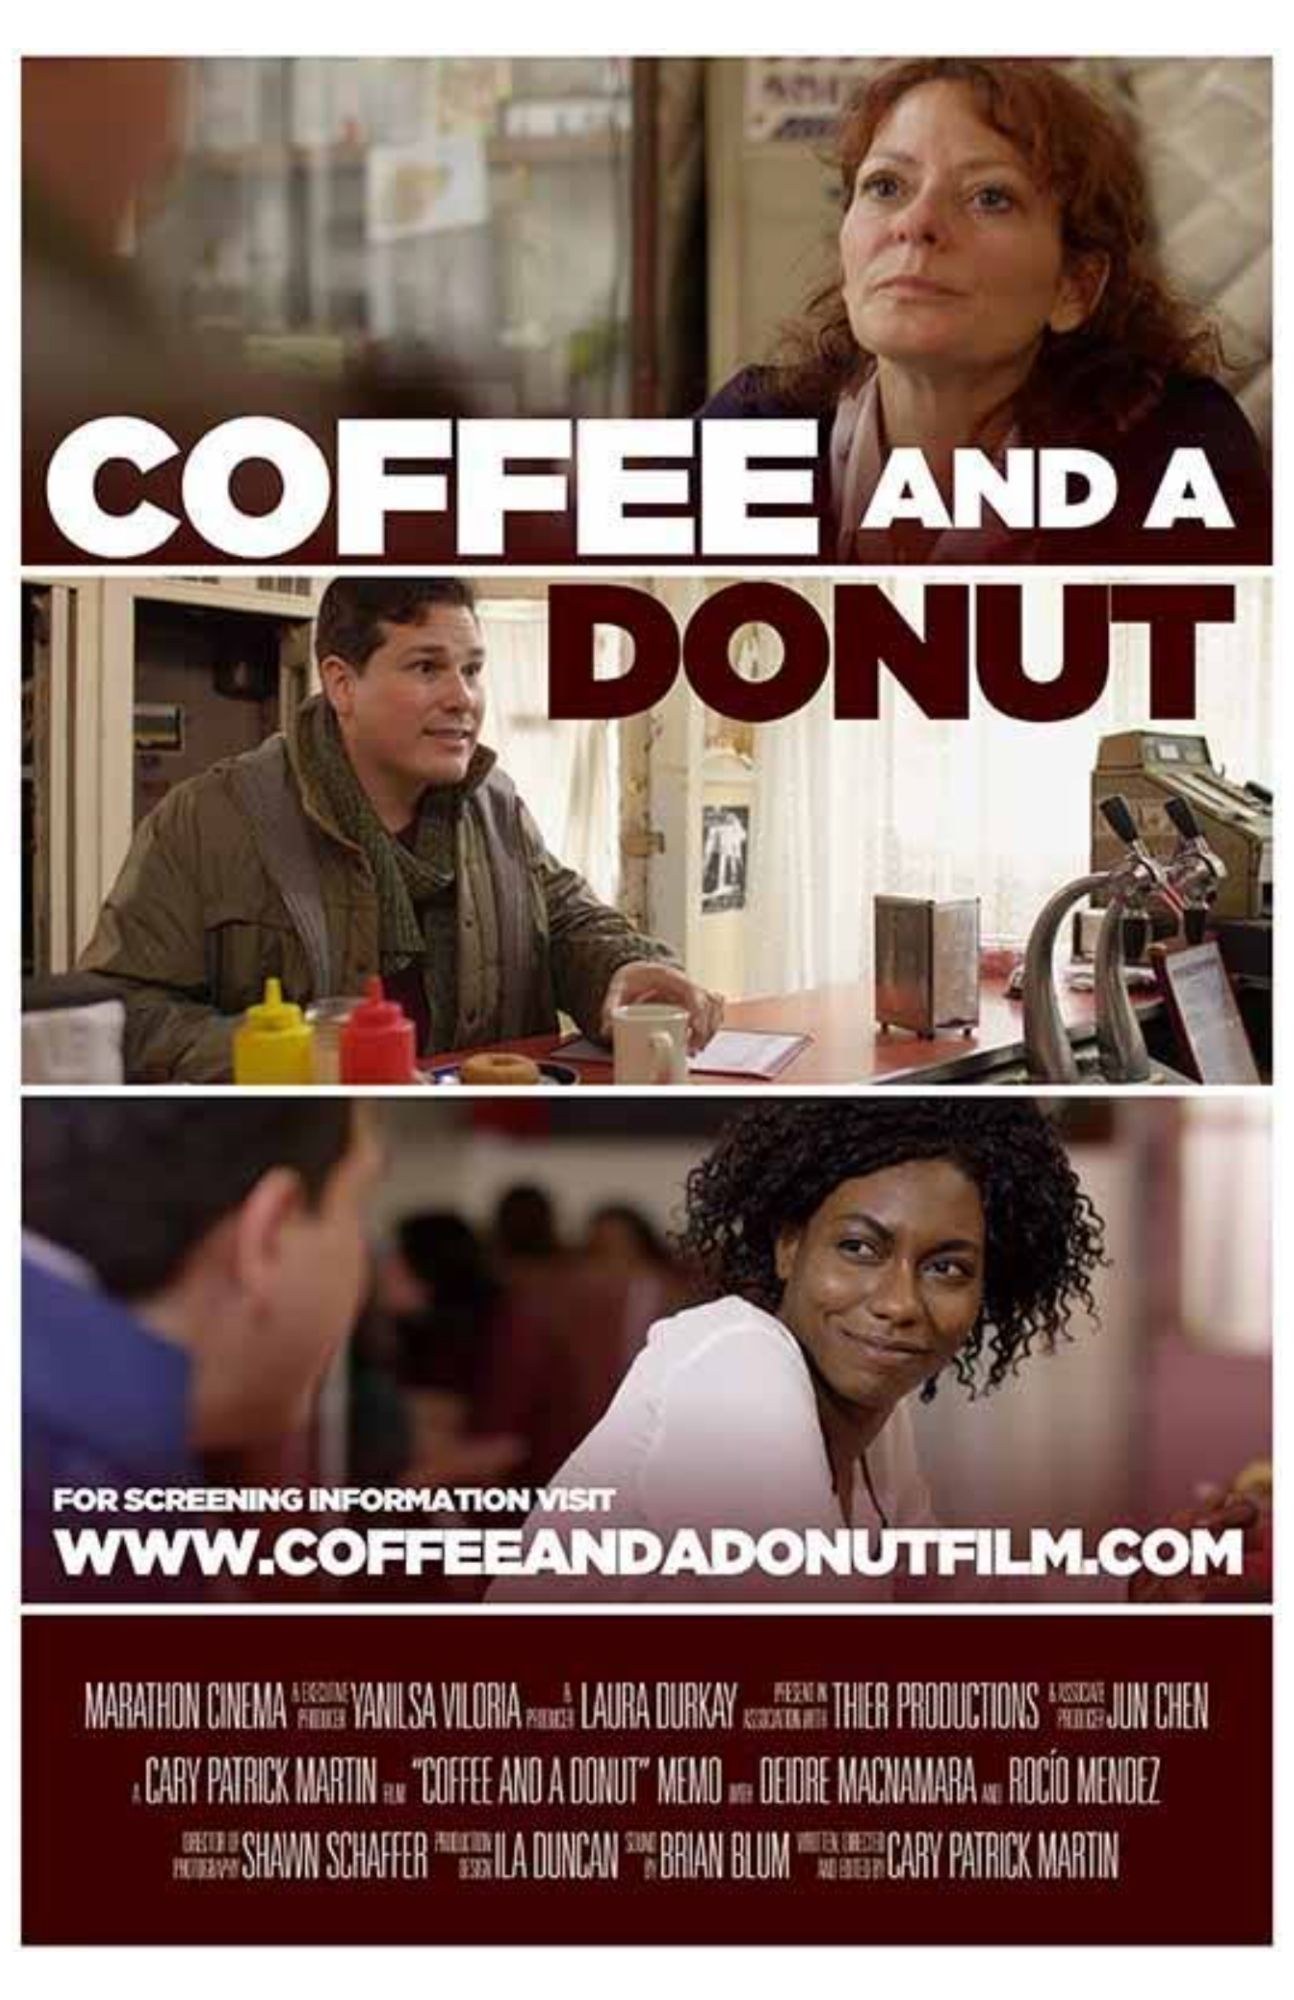 Coffee & a Donut, Cary Patrick Martin, writer, director, producer